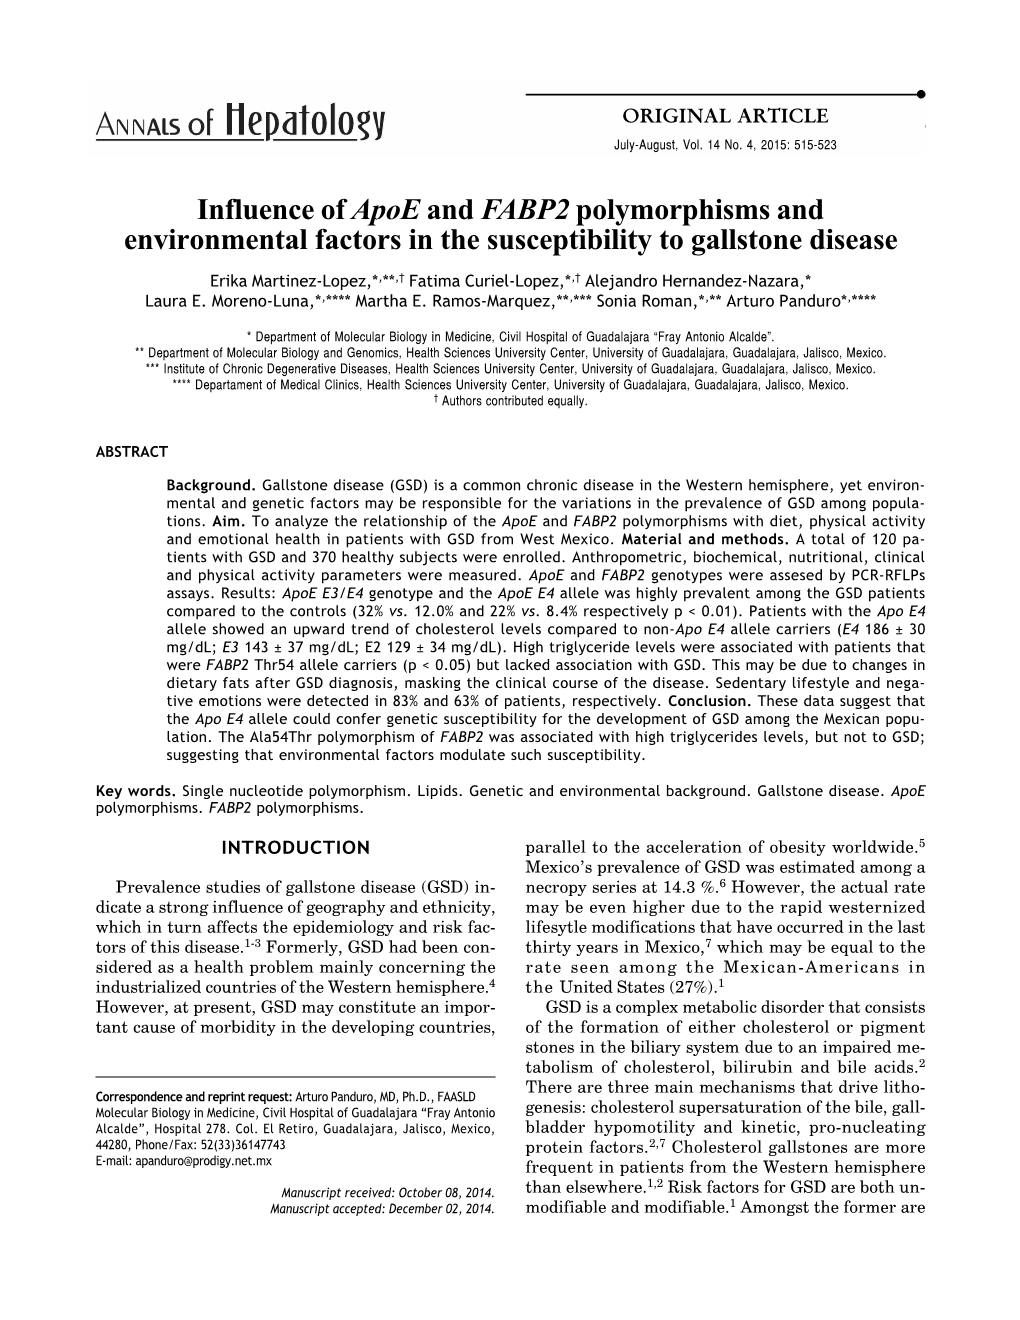 Influence of Apoe and FABP2 Polymorphisms and Environmental Factors in the Susceptibility to Gallstone Disease